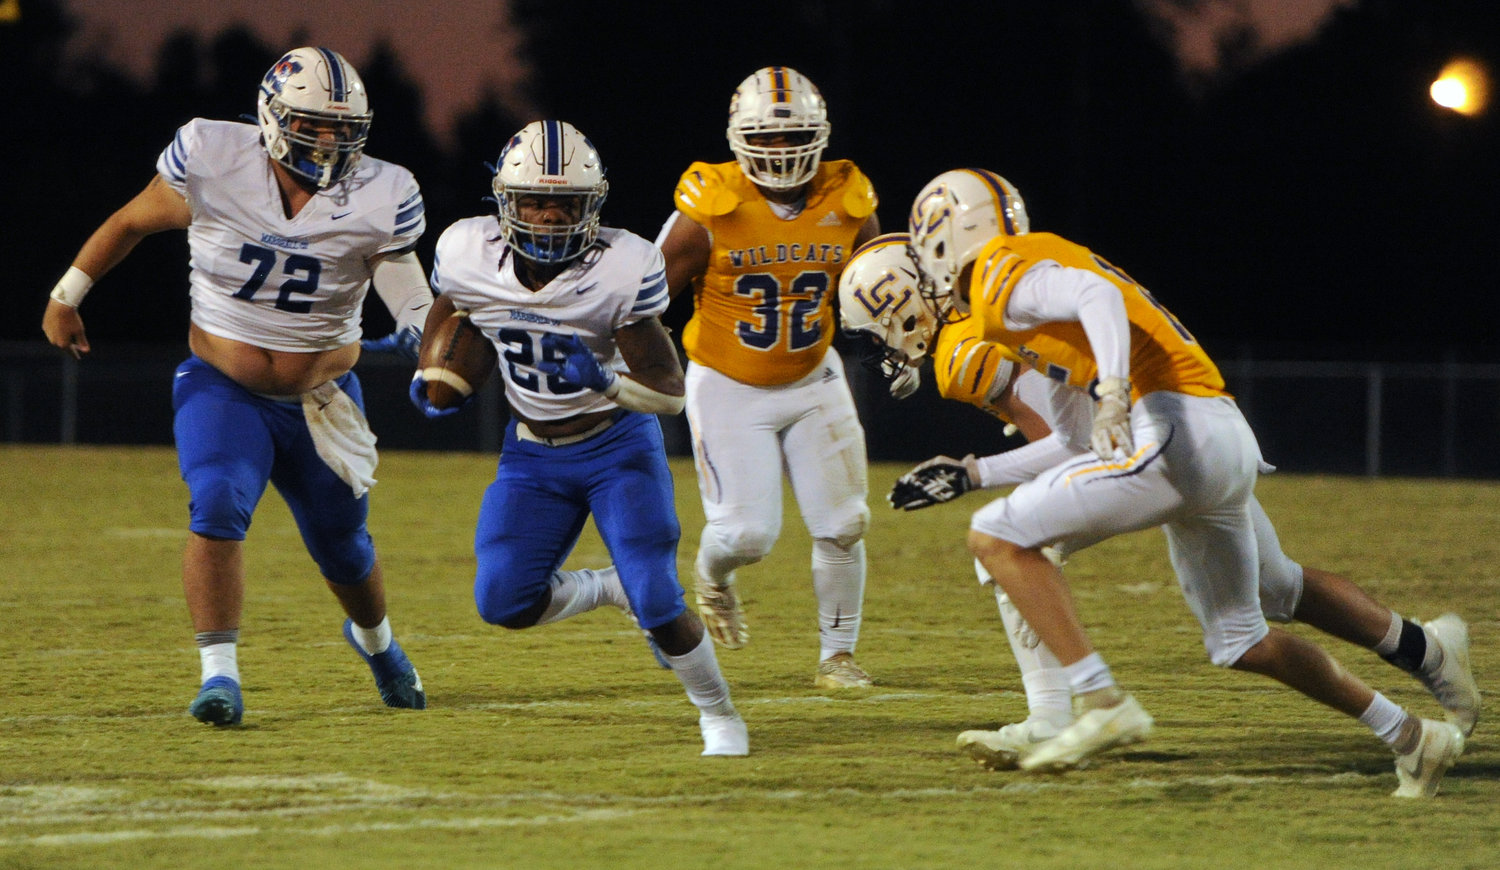 Demari Braden ran for 63 yards and a pair of touchdowns against Lawrence County on Thursday night.